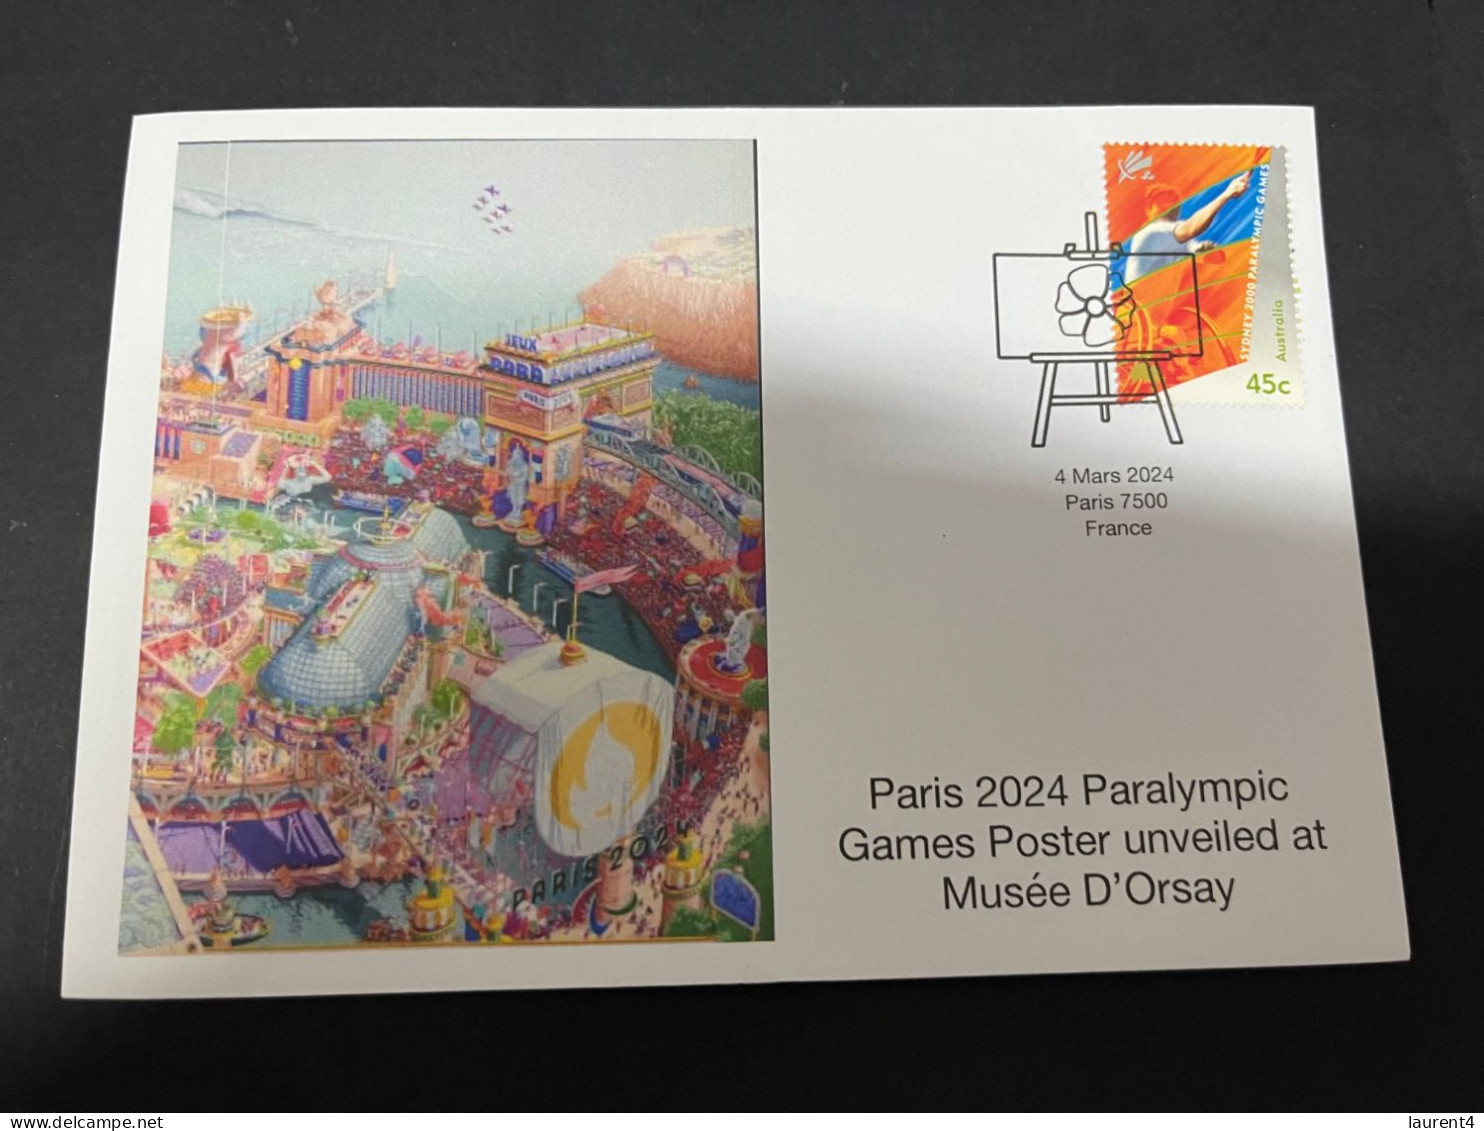 6-3-2024 (2 Y 17) Paris Olympic Games 2024 - 2 Olympic Games Posters Unveil At Musée D'Orsay (Paralympics) - Summer 2024: Paris